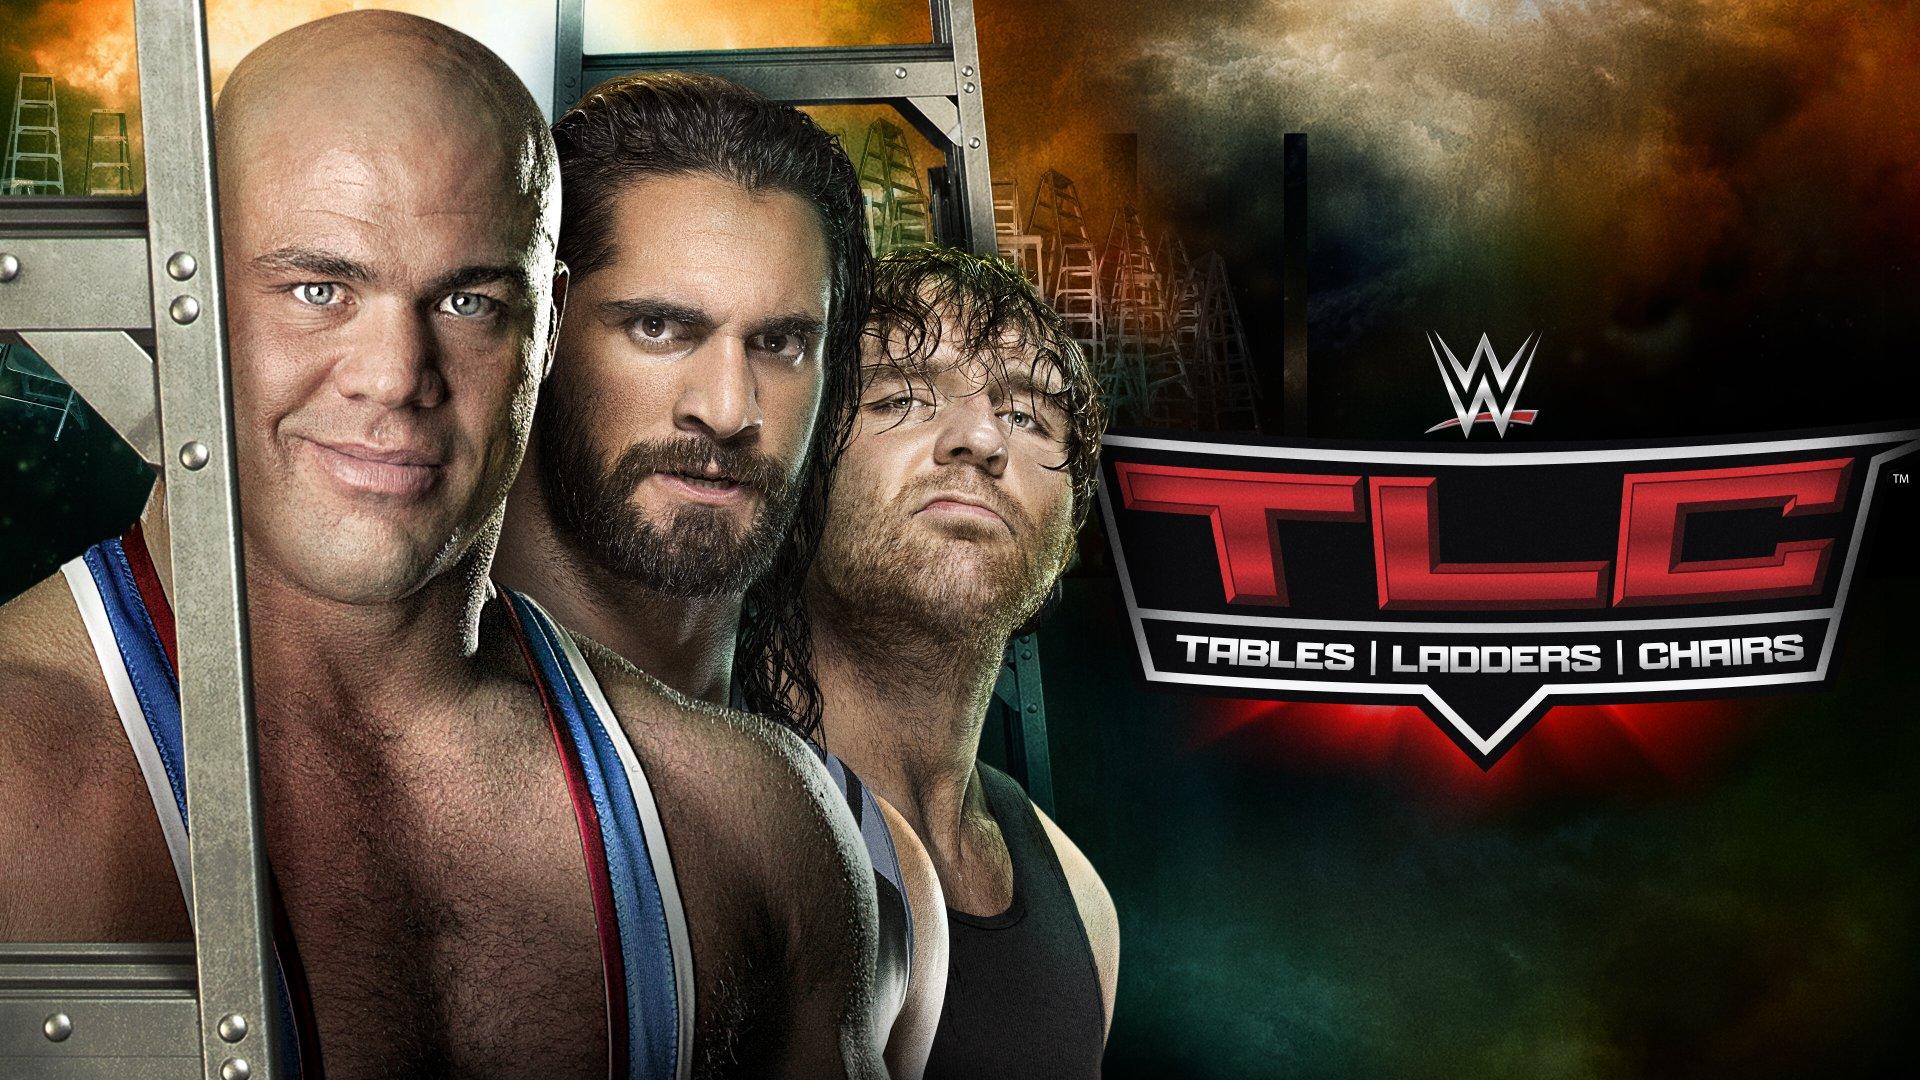 WWE TLC - Tables, Ladders & Chairs 2017